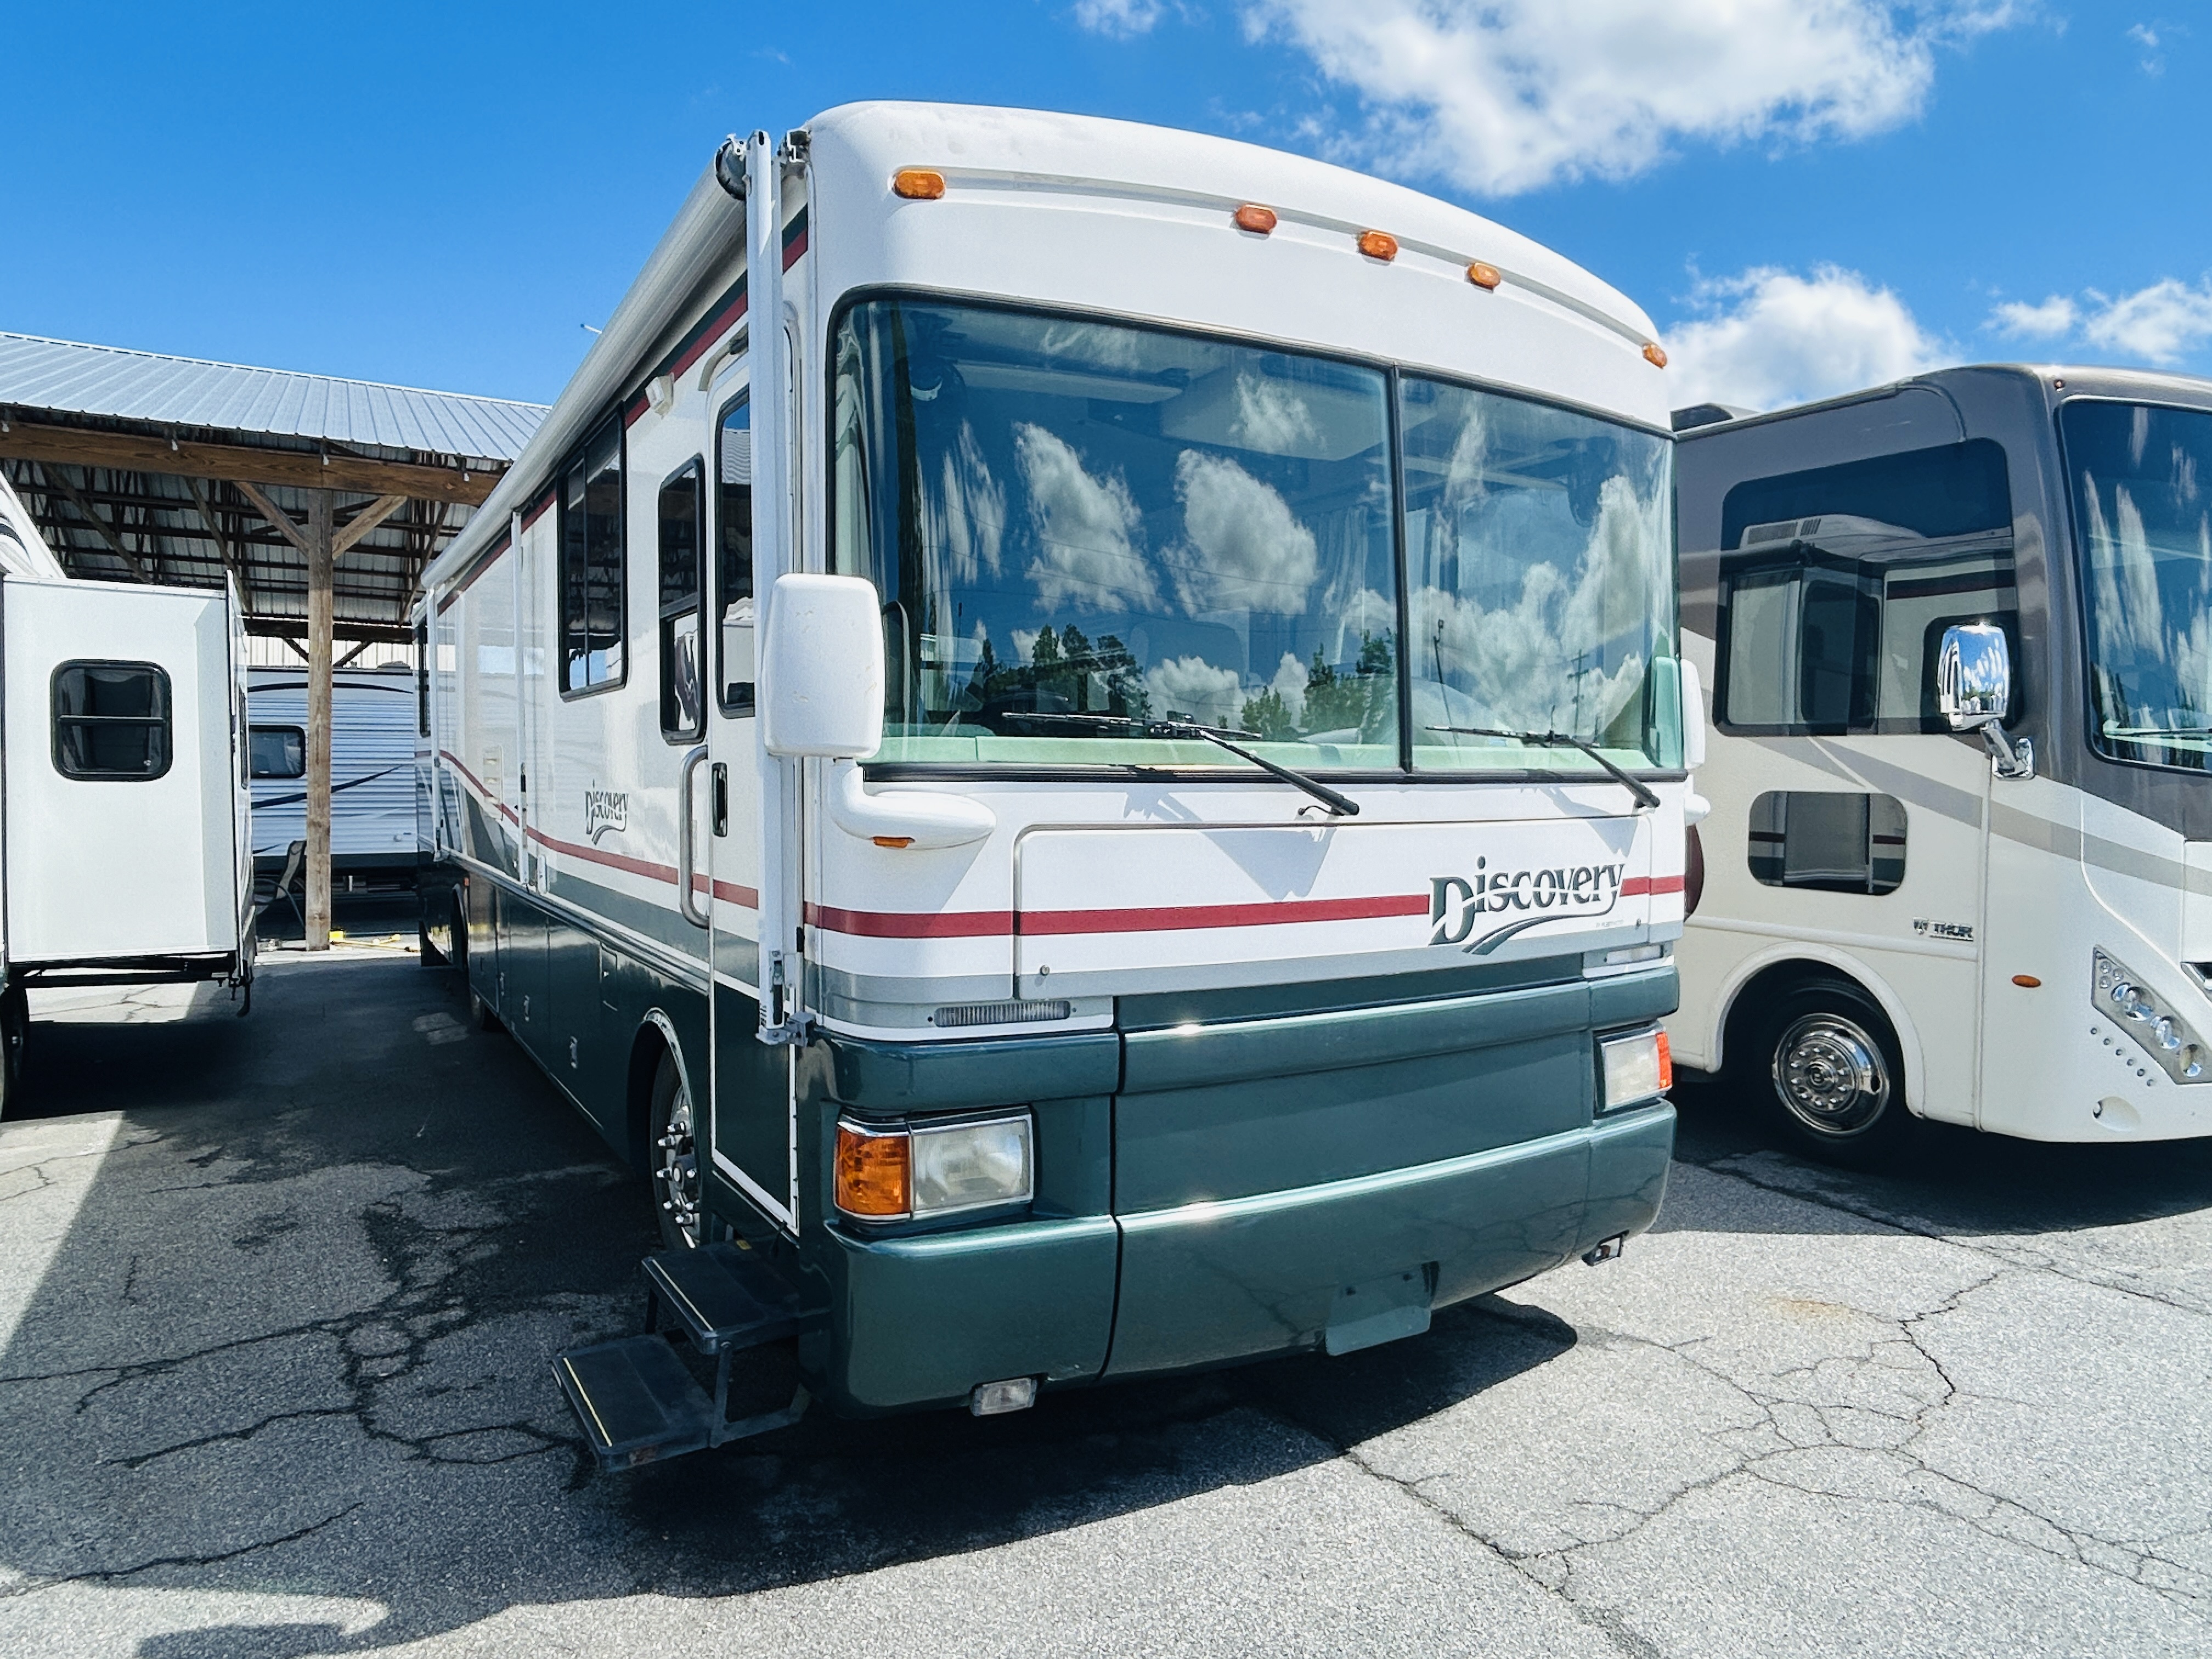 USED 1998 Fleetwood DISCOVERY 34Q